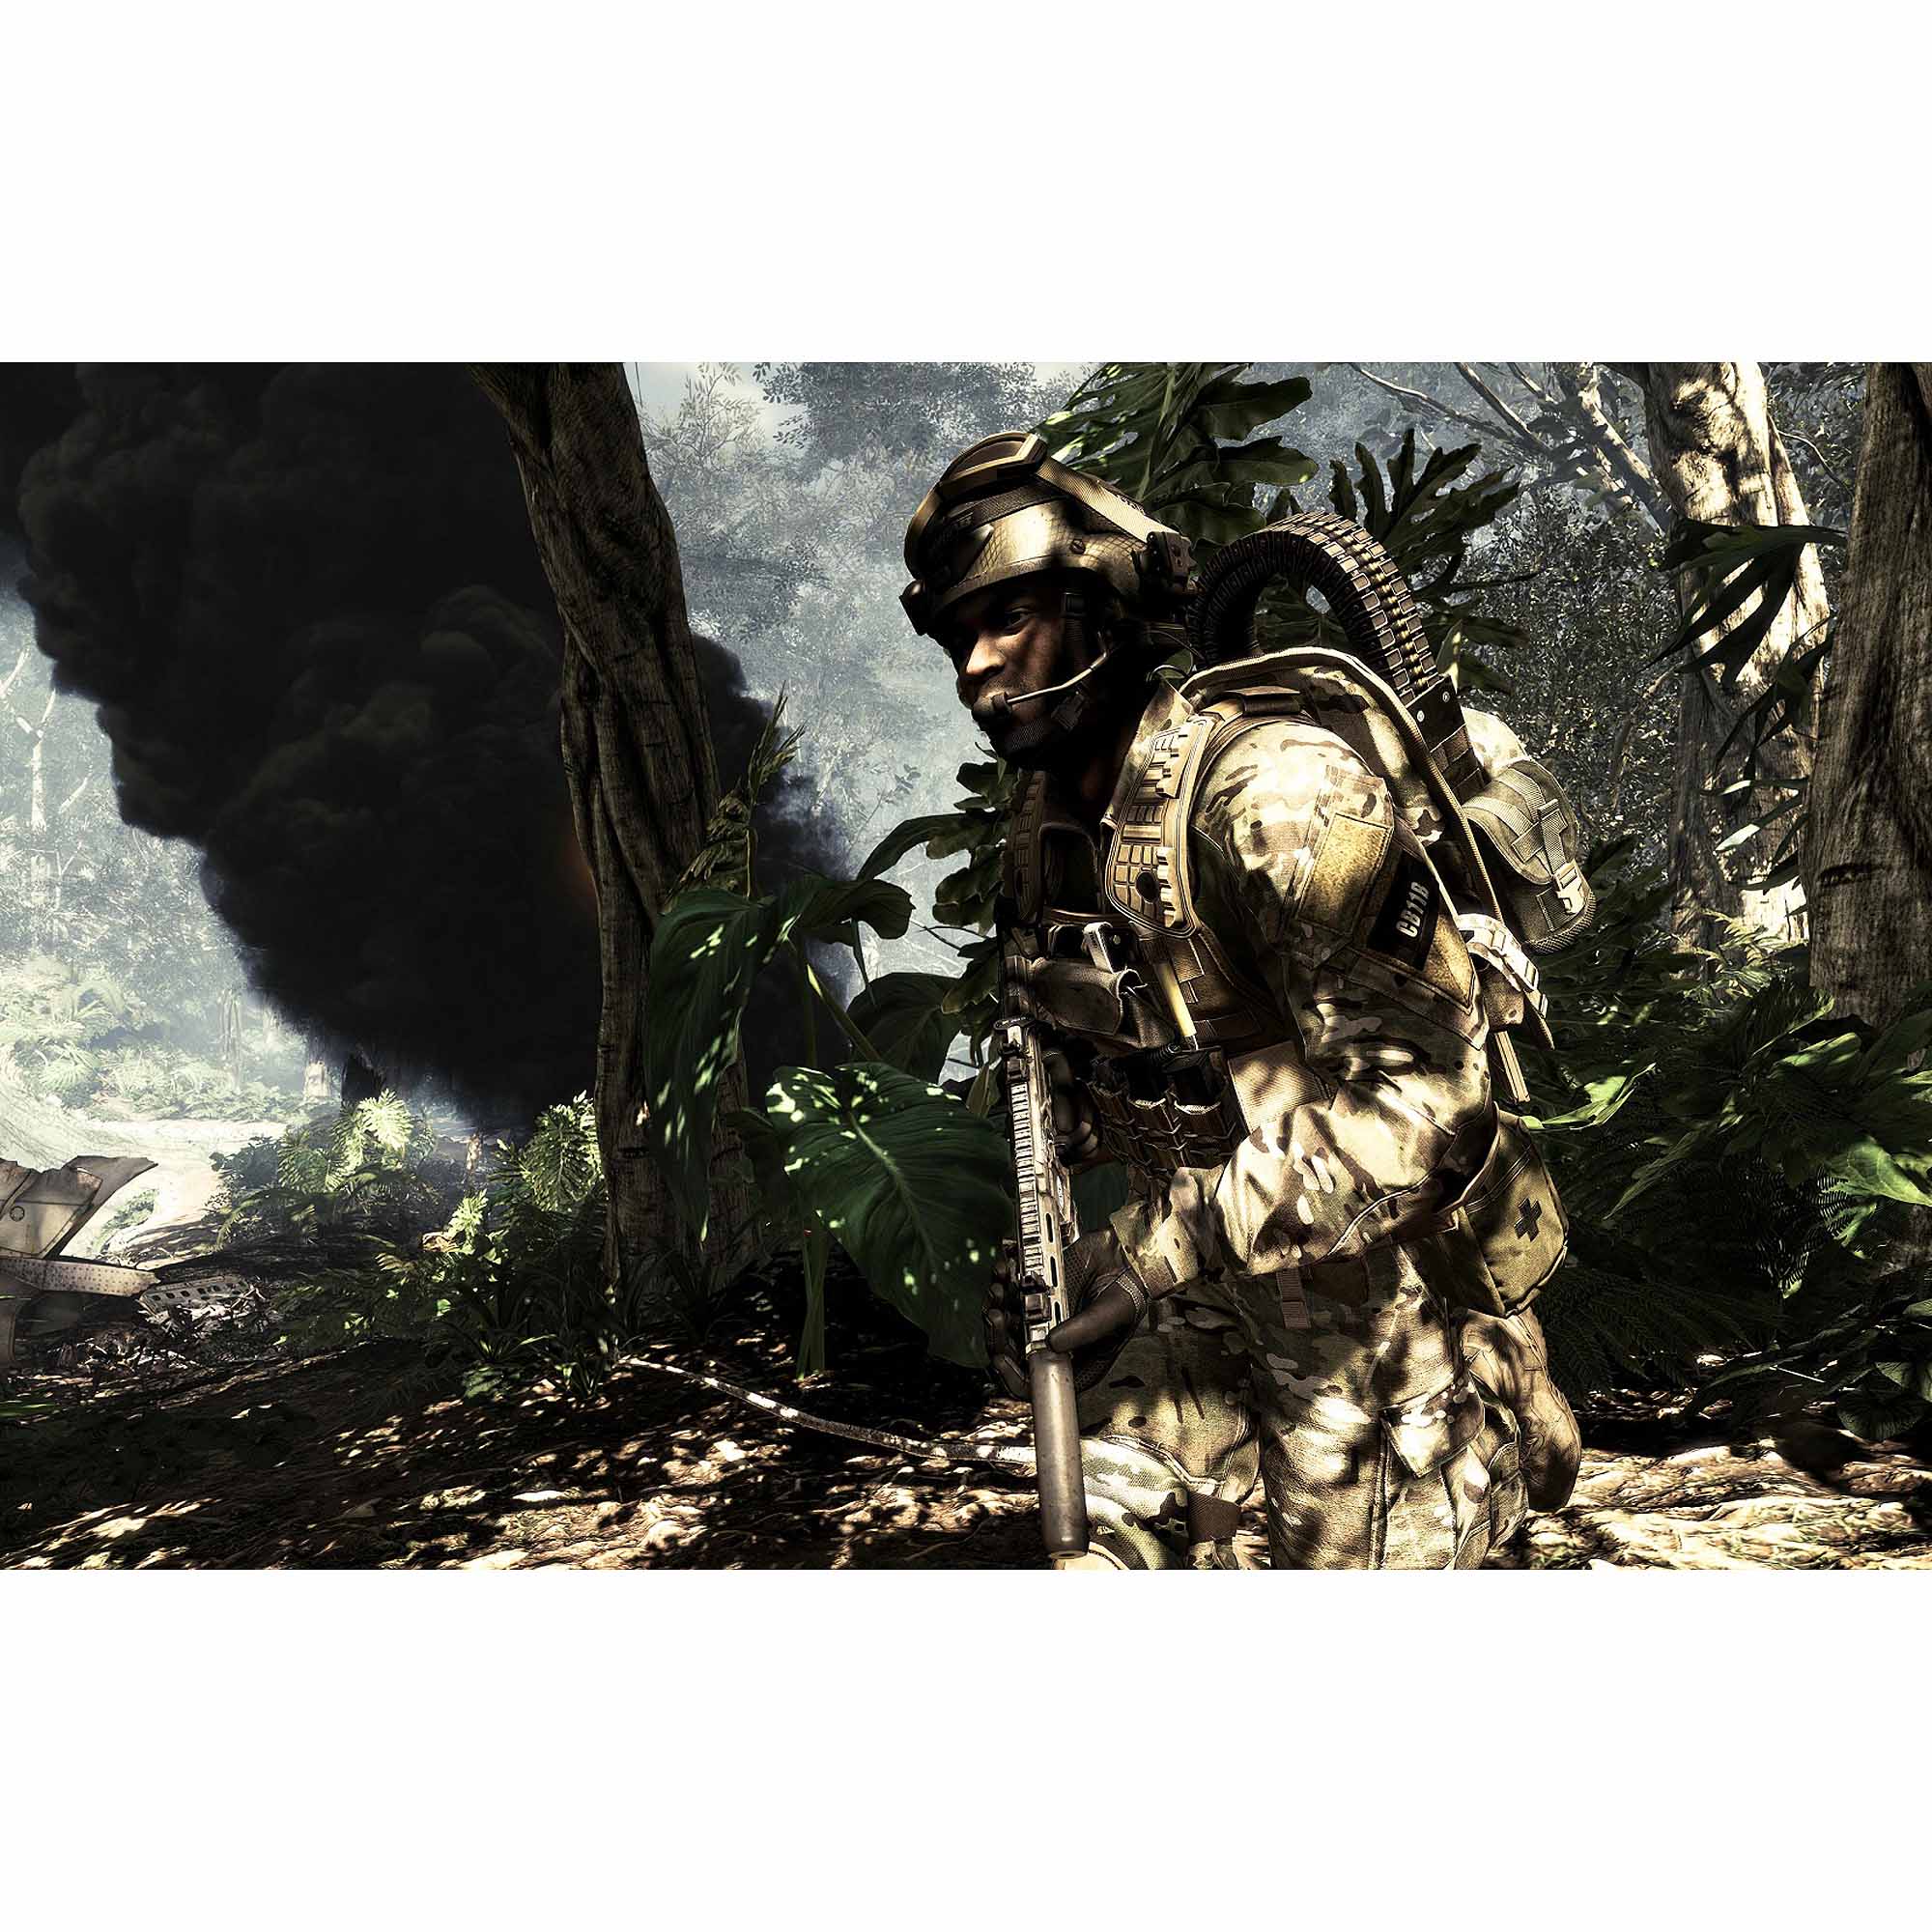 Call of Duty: Ghosts, Activision, Xbox 360, 047875846814 - image 1 of 5